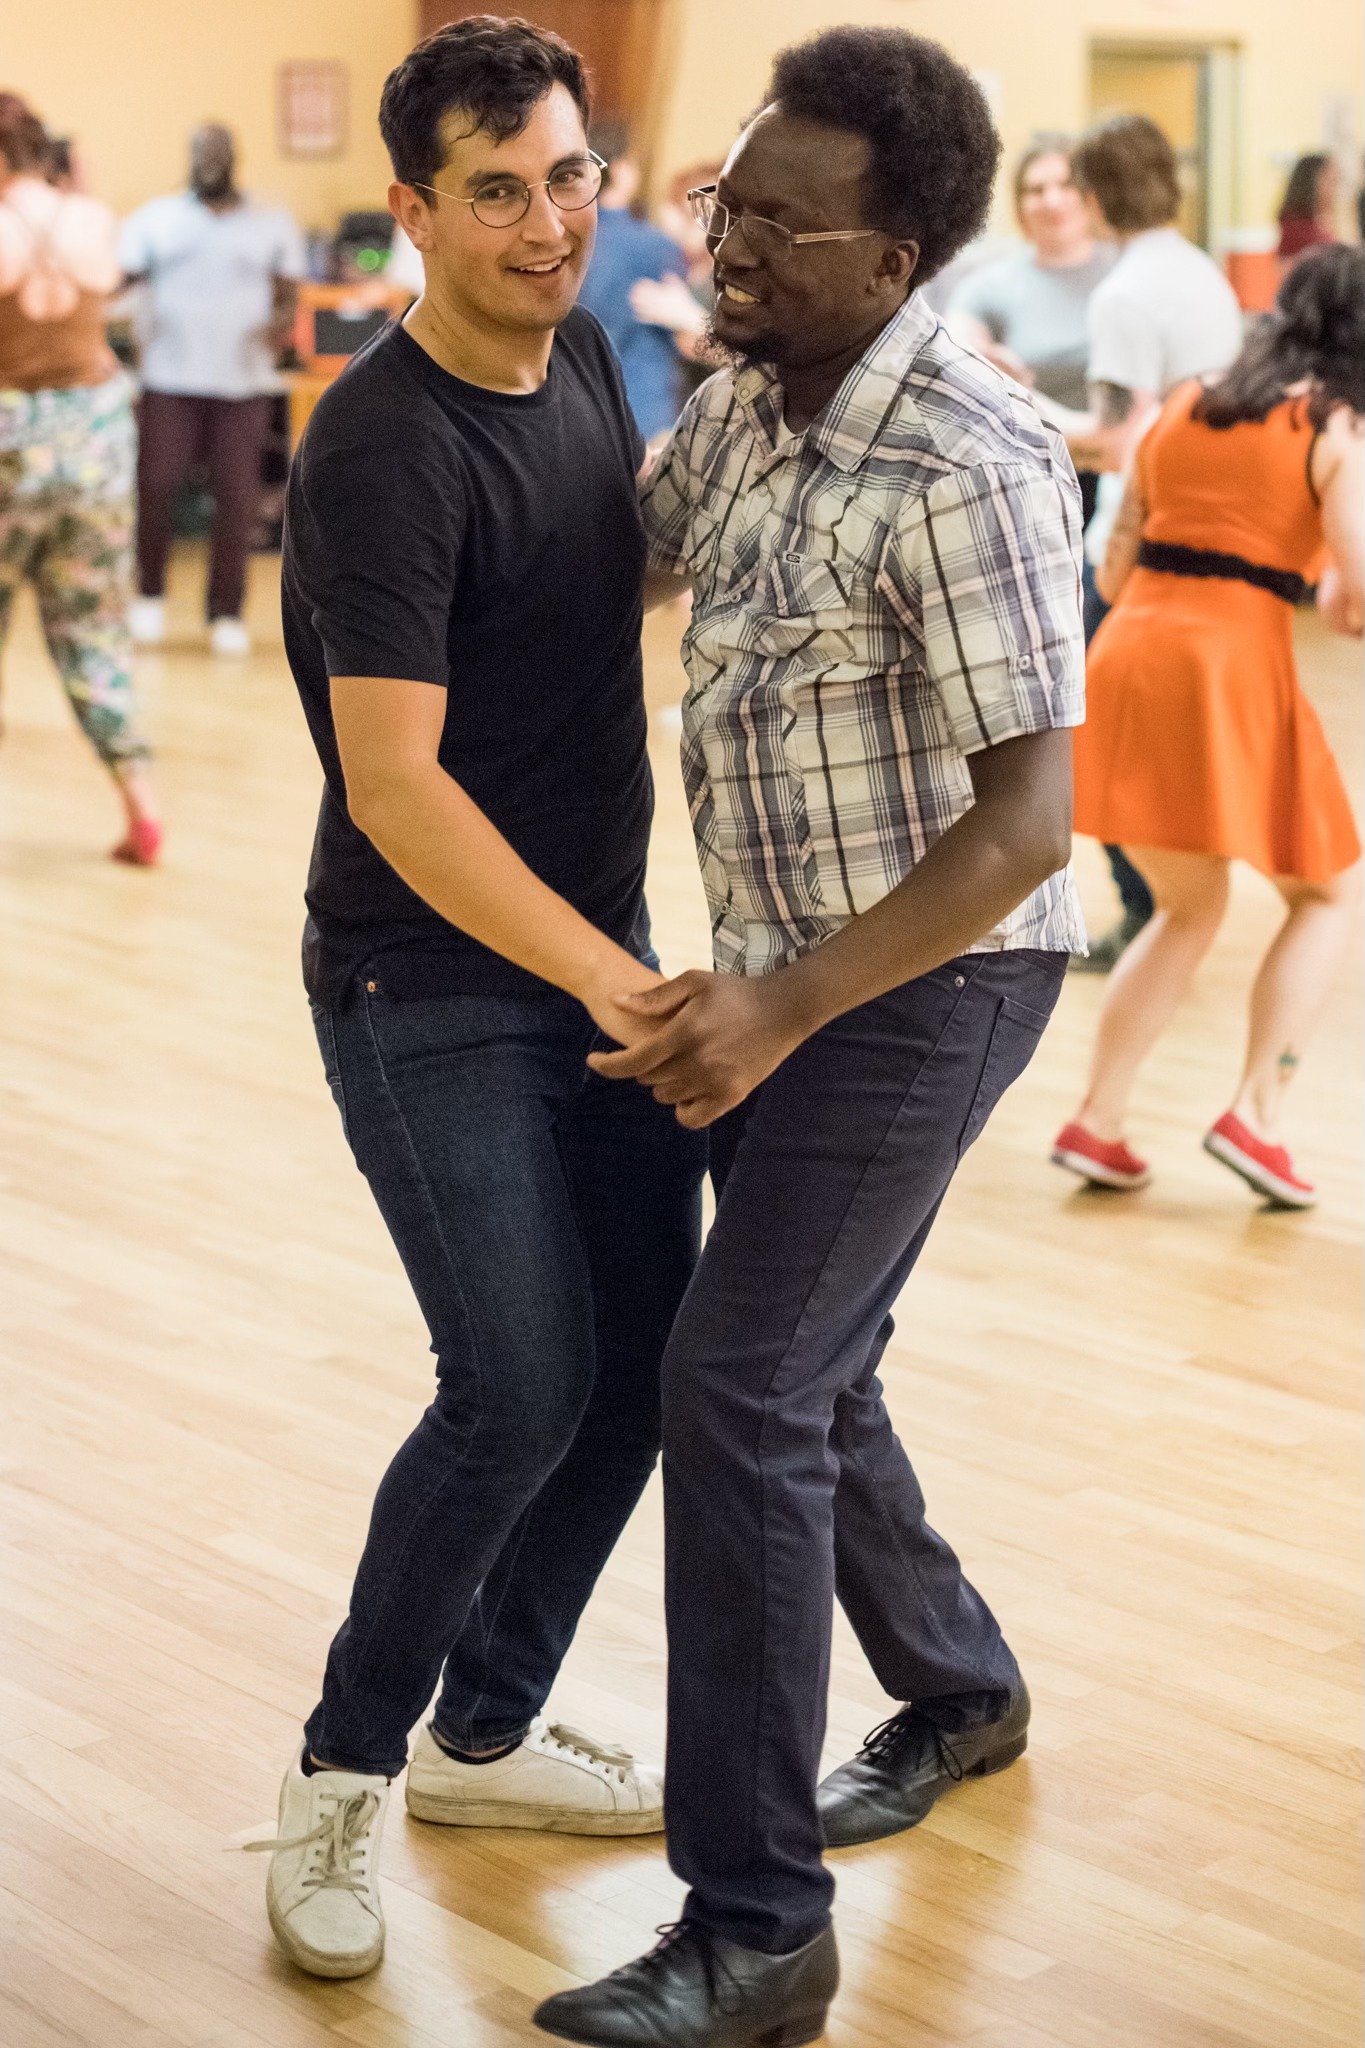 It's on!!! Round 1 of Swing Battle 2024 begins tonight! Join us and @communitymindeddance at the Avalon Ballroom (in the back tango studio) for a beginner lesson, social dance, Charleston battle and other competitions. Then, get back in the ring on S